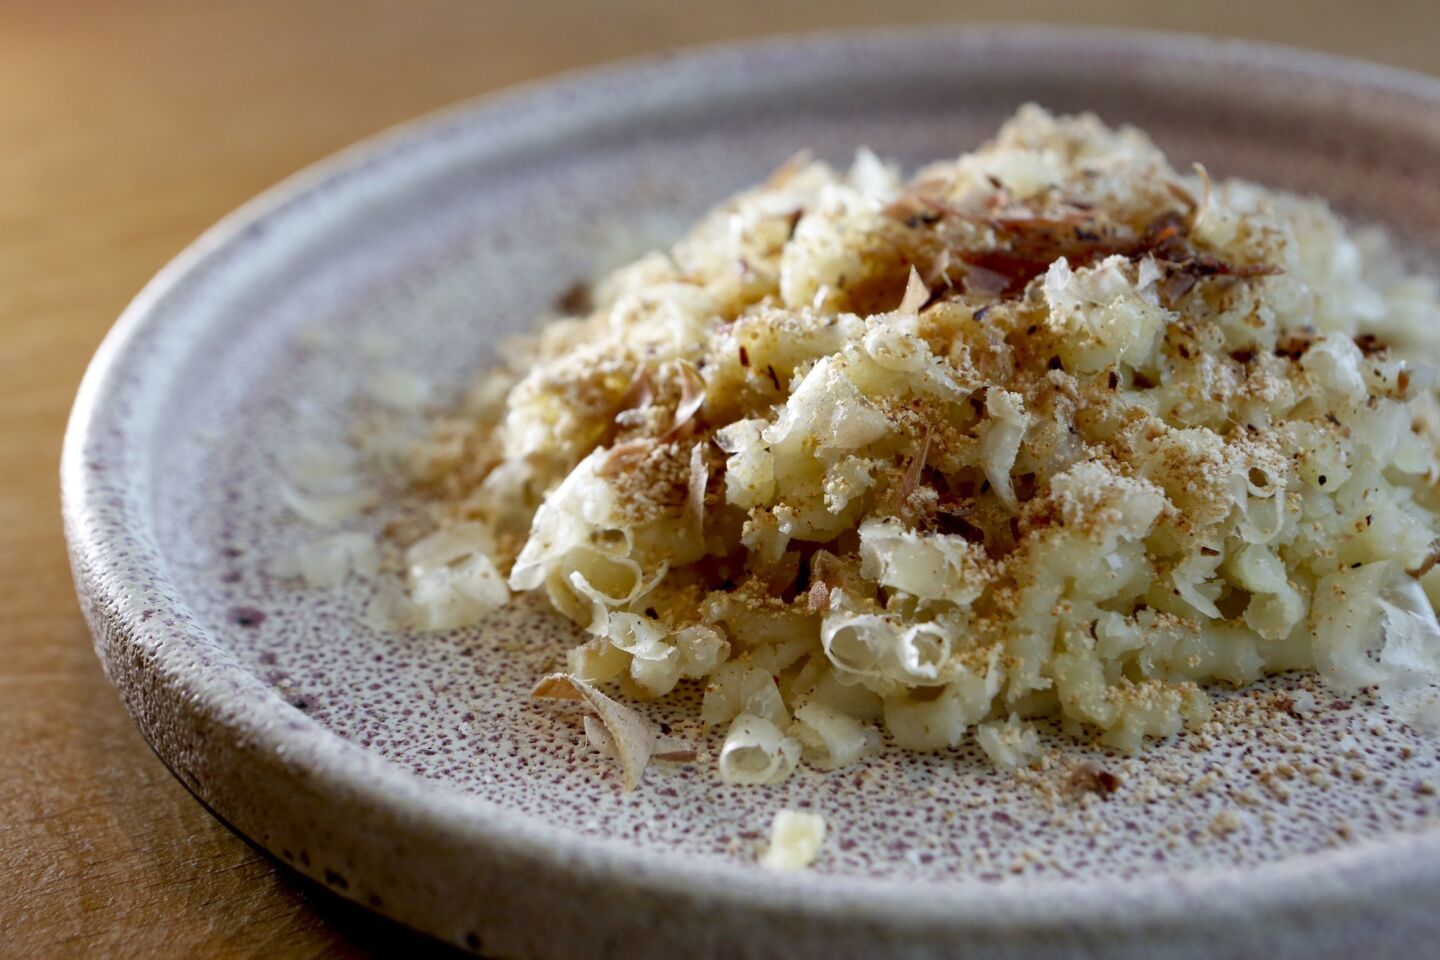 Chef Ludovic Lefebvre makes a main dish out of slightly undercooked Weiser Family Farms potatoes passed through a ricer directly onto a plate of brown butter, onion soubise and Salers cheese from the Auvergne, then sprinkled with dried Japanese bonito flakes.